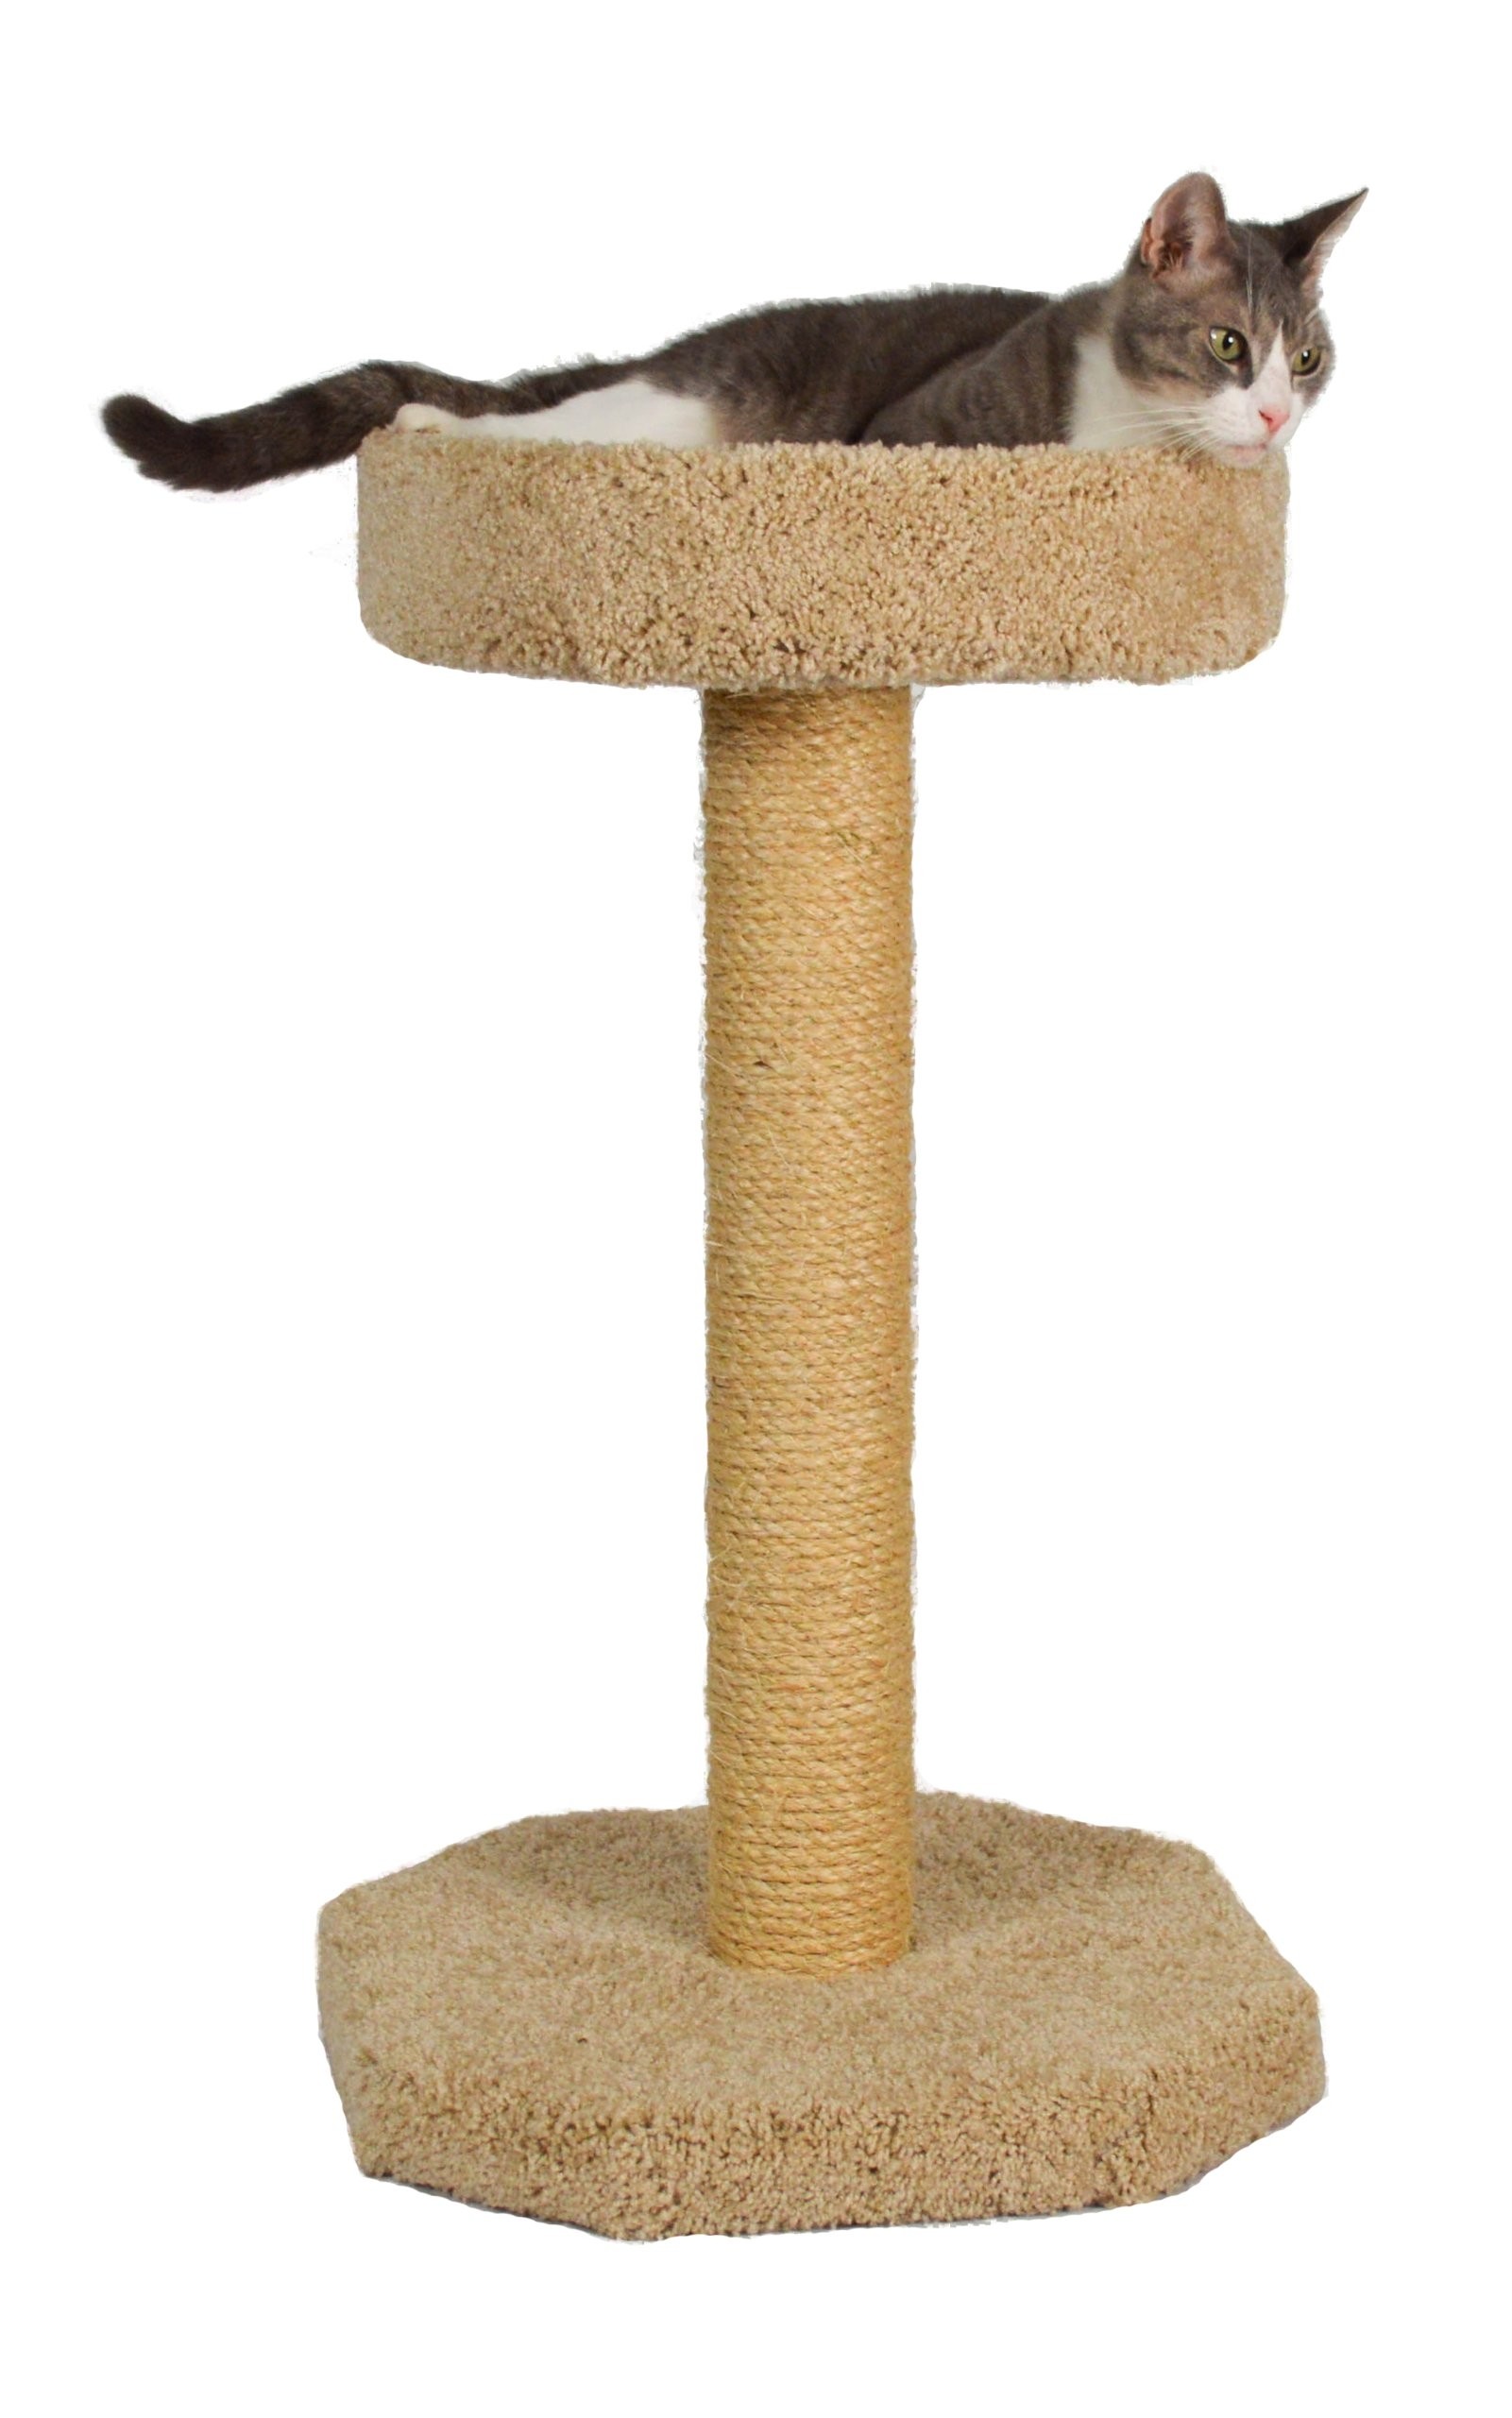 Molly and Friends "Feline Recliner" Premium Handmade One Tier Sisal Cat Scratching Post Furniture with Bed, Model Scr/b, Beige